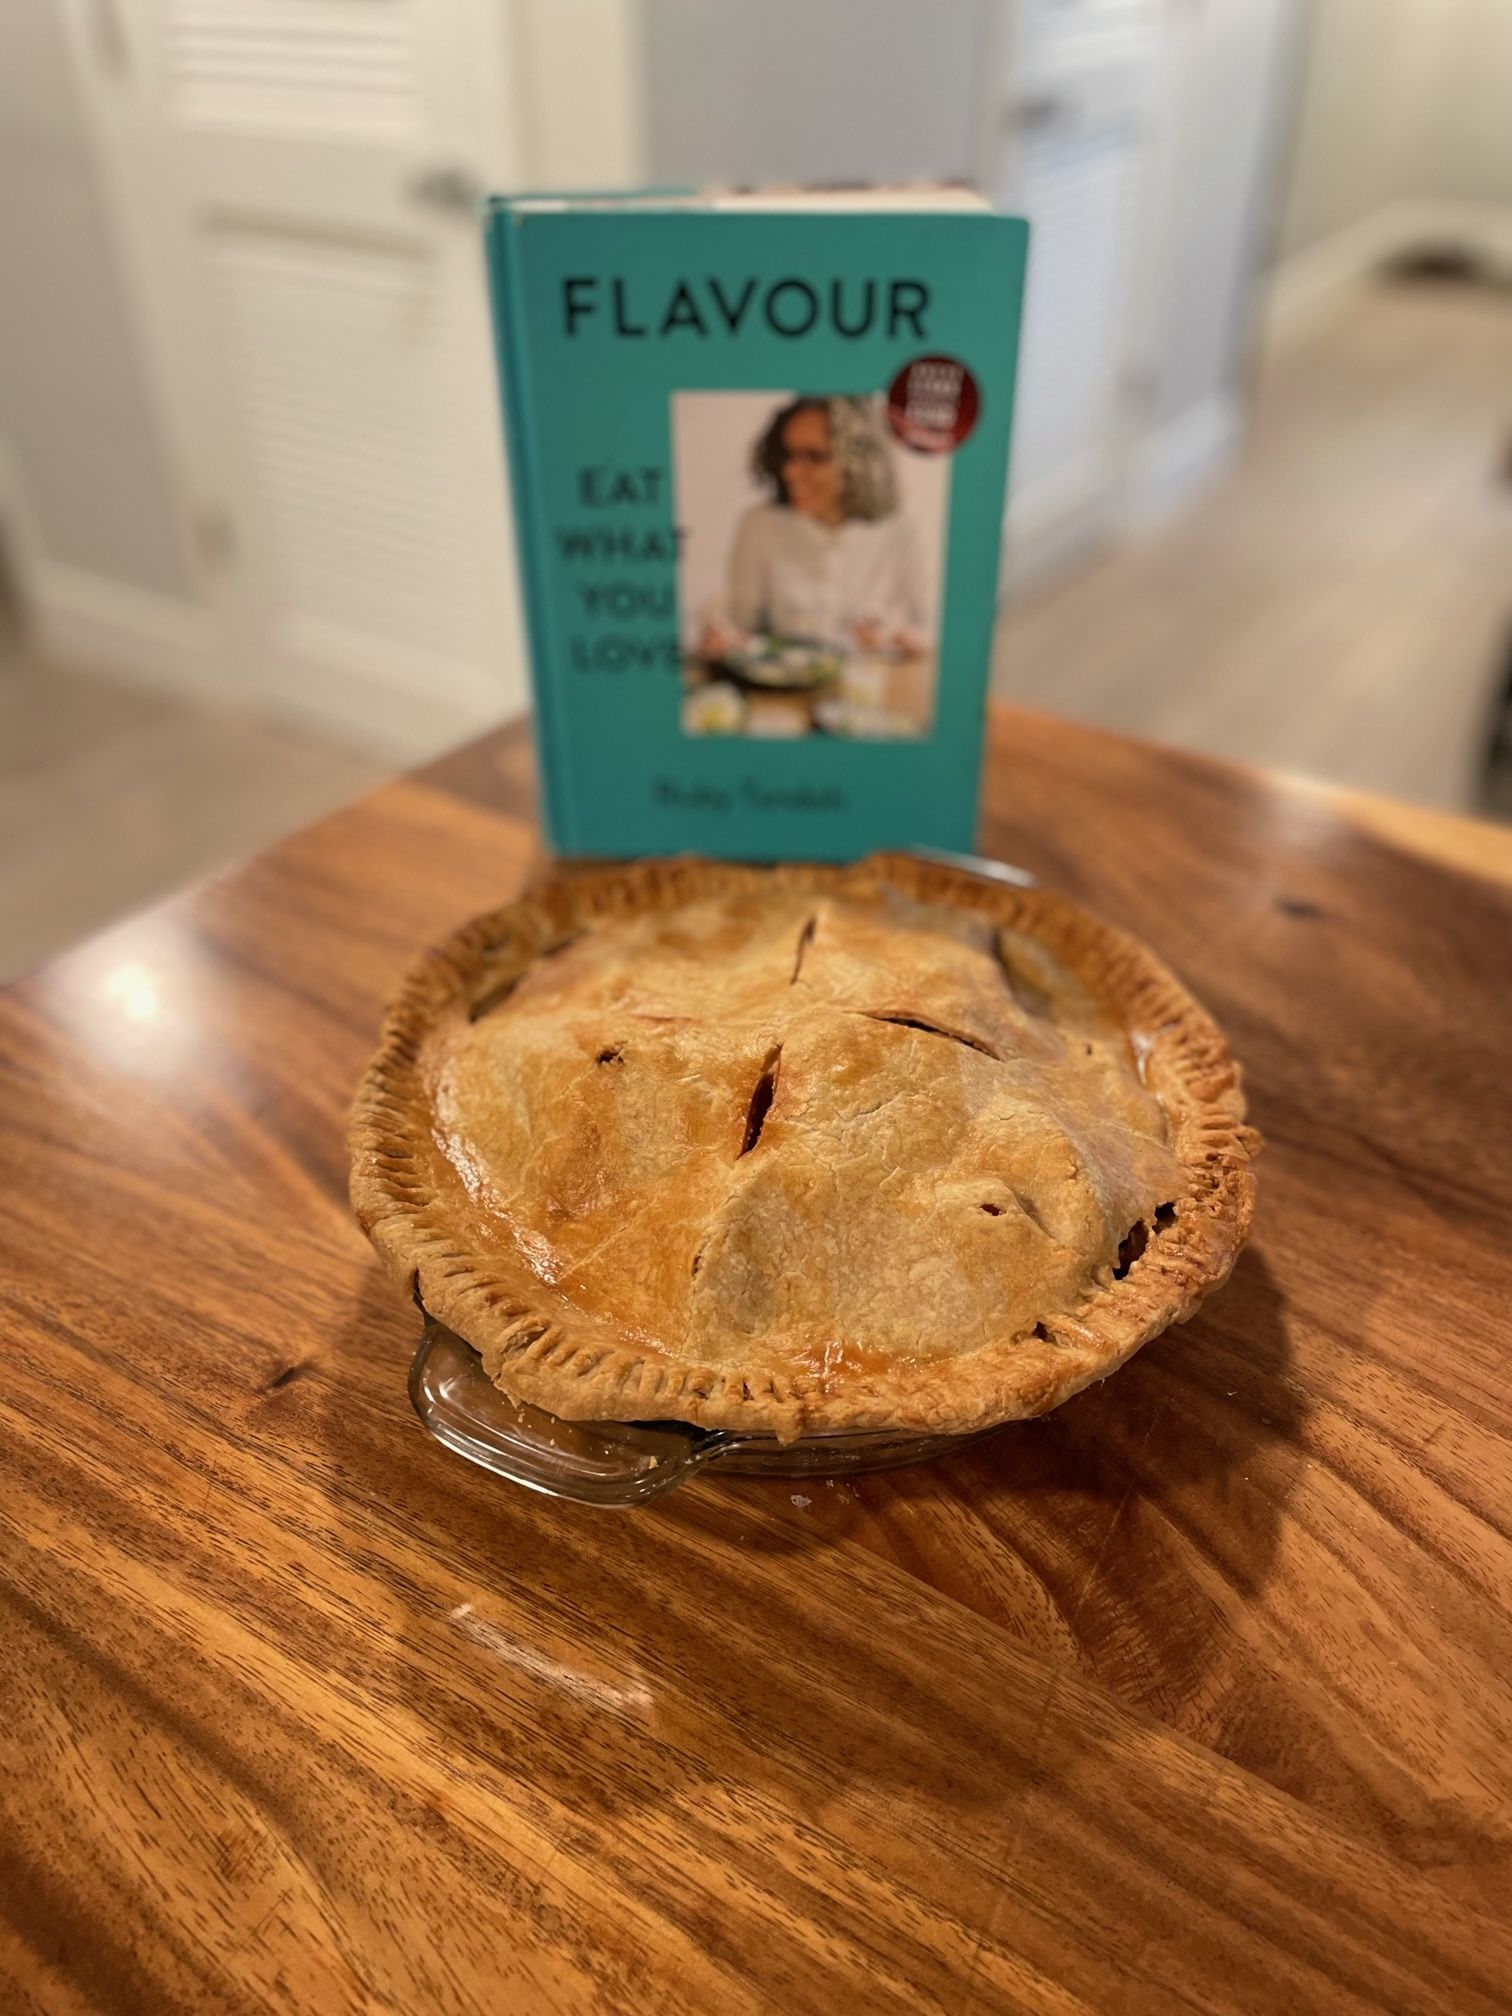 Apple pie with Flavour by Ruby Tandoh cookbook